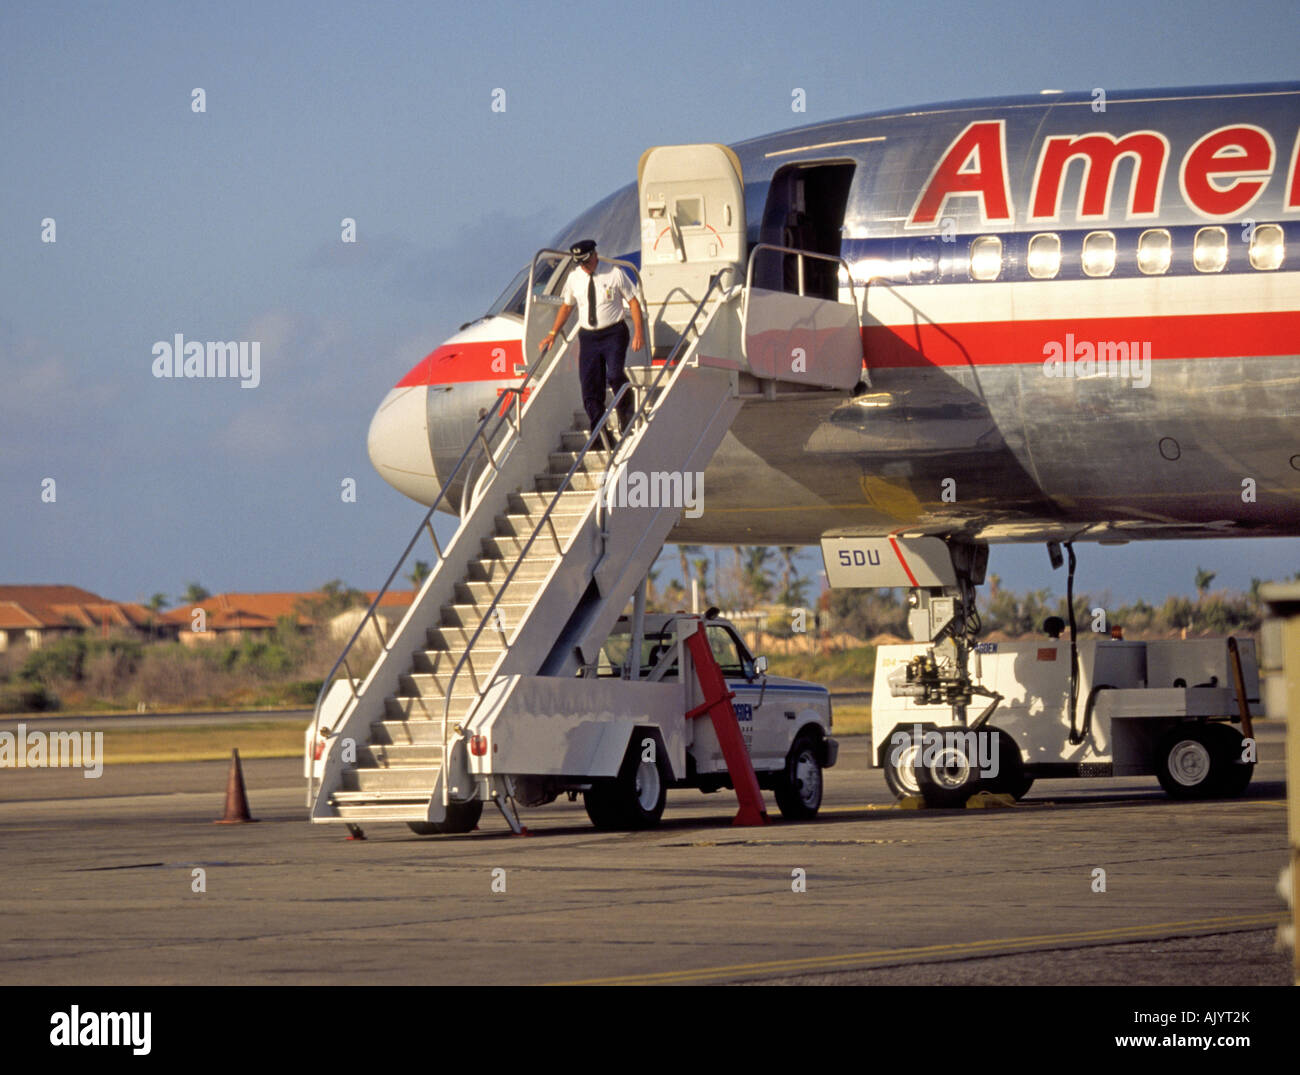 An American Airlines passenger jet on the tarmac at the international airport in Caracas Stock Photo